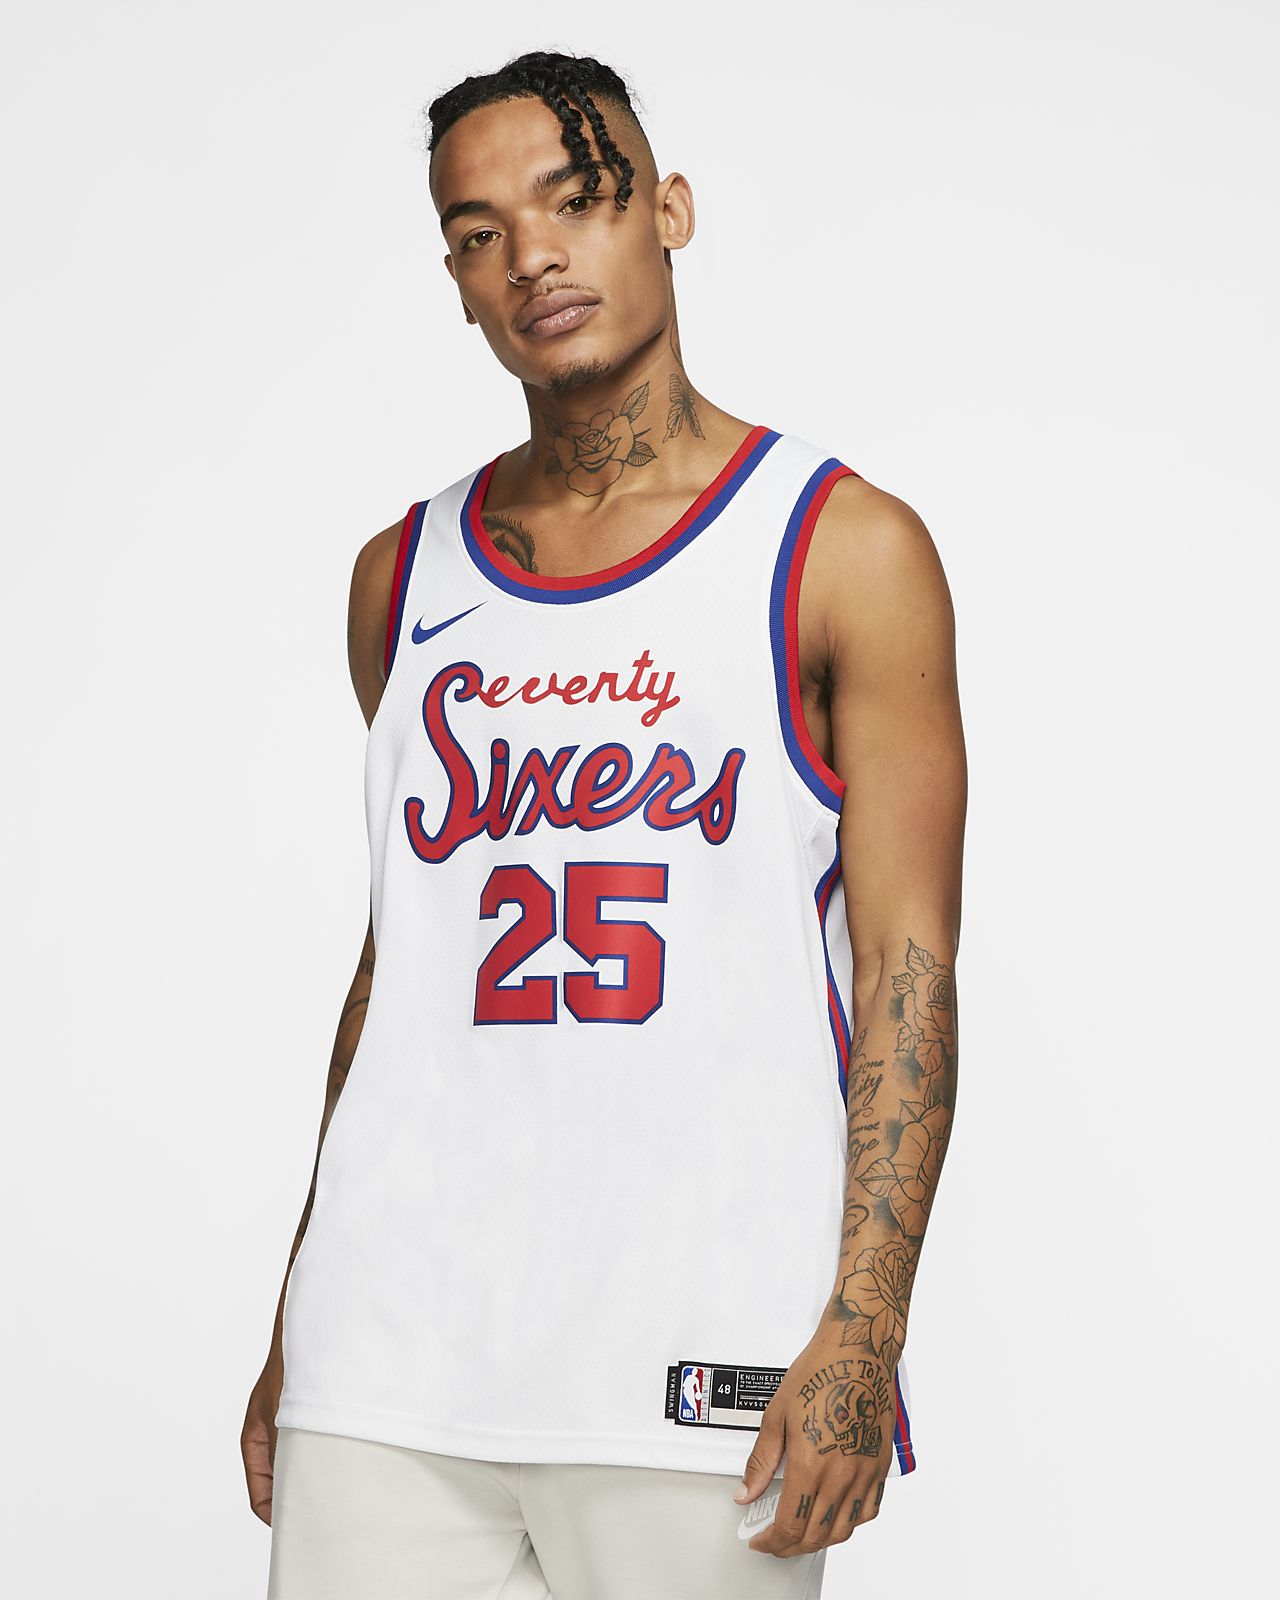 sixers classic jersey